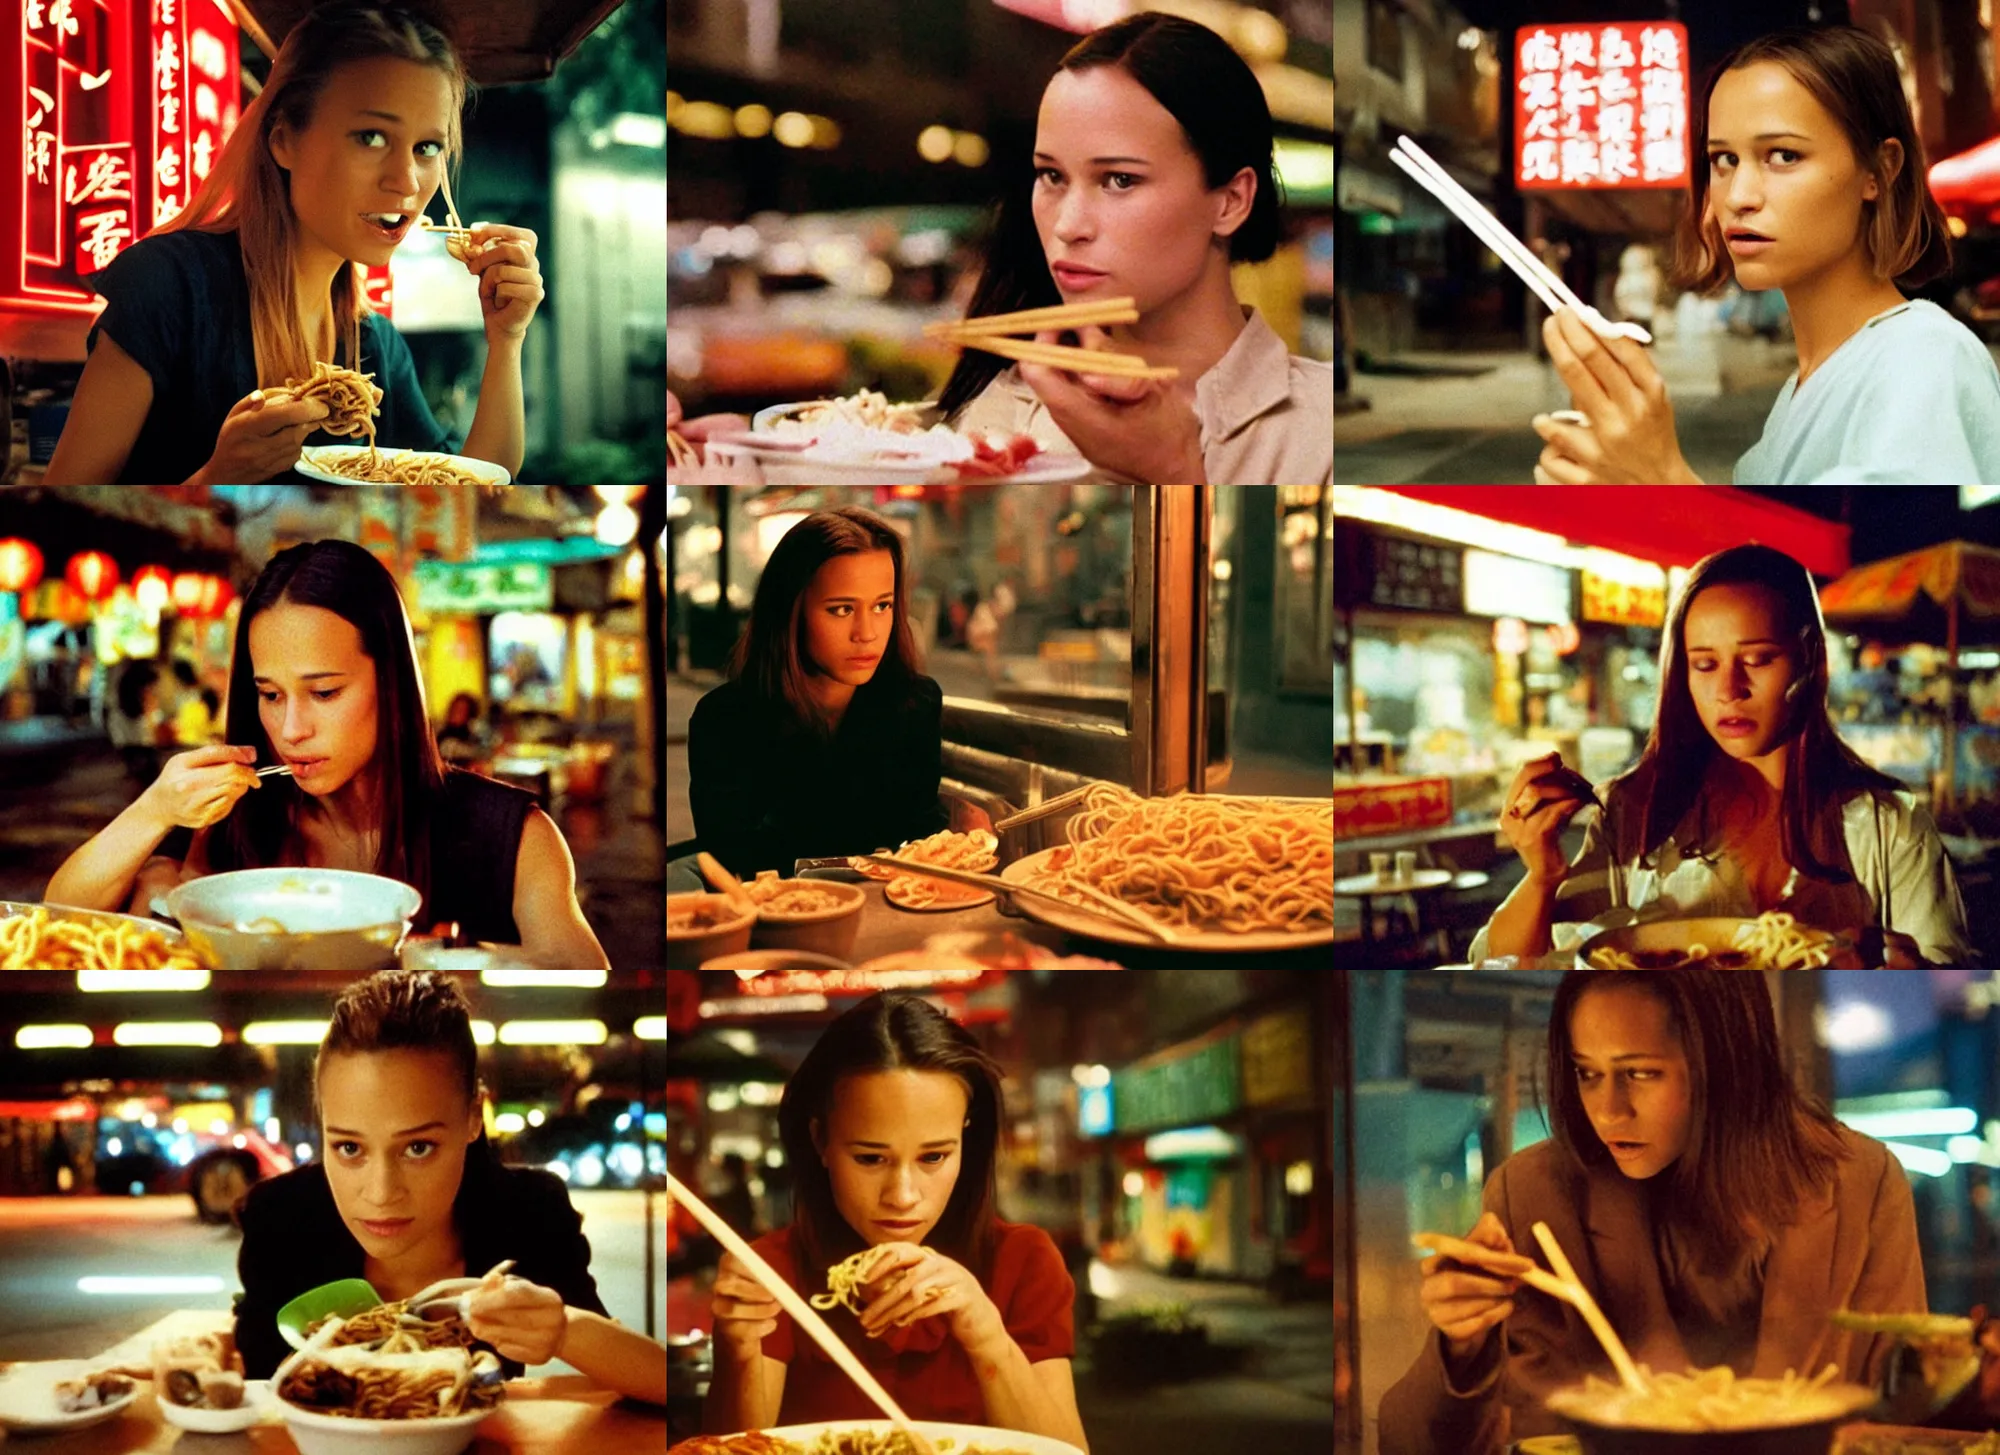 Prompt: A close-up, color outdoor film still of a Alicia Amanda Vikander Eating noodles at a Chinese food stall, ambient lighting at night, from Matrix(1999).